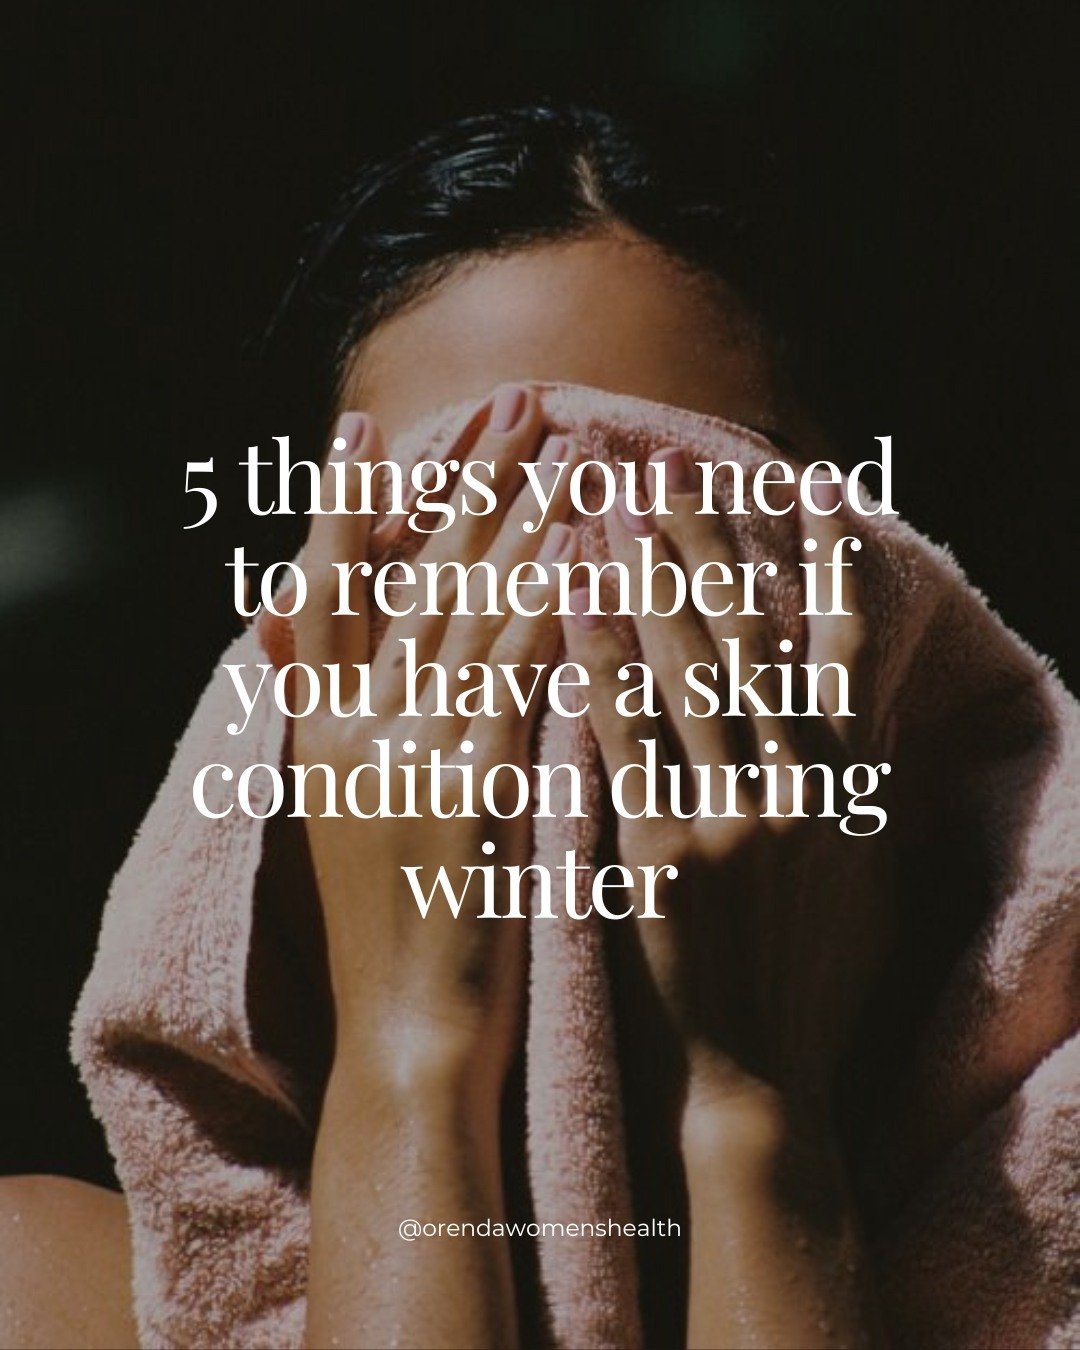 WINTER SKIN TIPS BELOW! ❄️

1. Don&rsquo;t forget to check in with your skin-therapist to get on top of your skin before the dryness from the heaters kick in

2. Now&rsquo;s not the time for you to forget taking your fish oils 

3. Do your best to tr